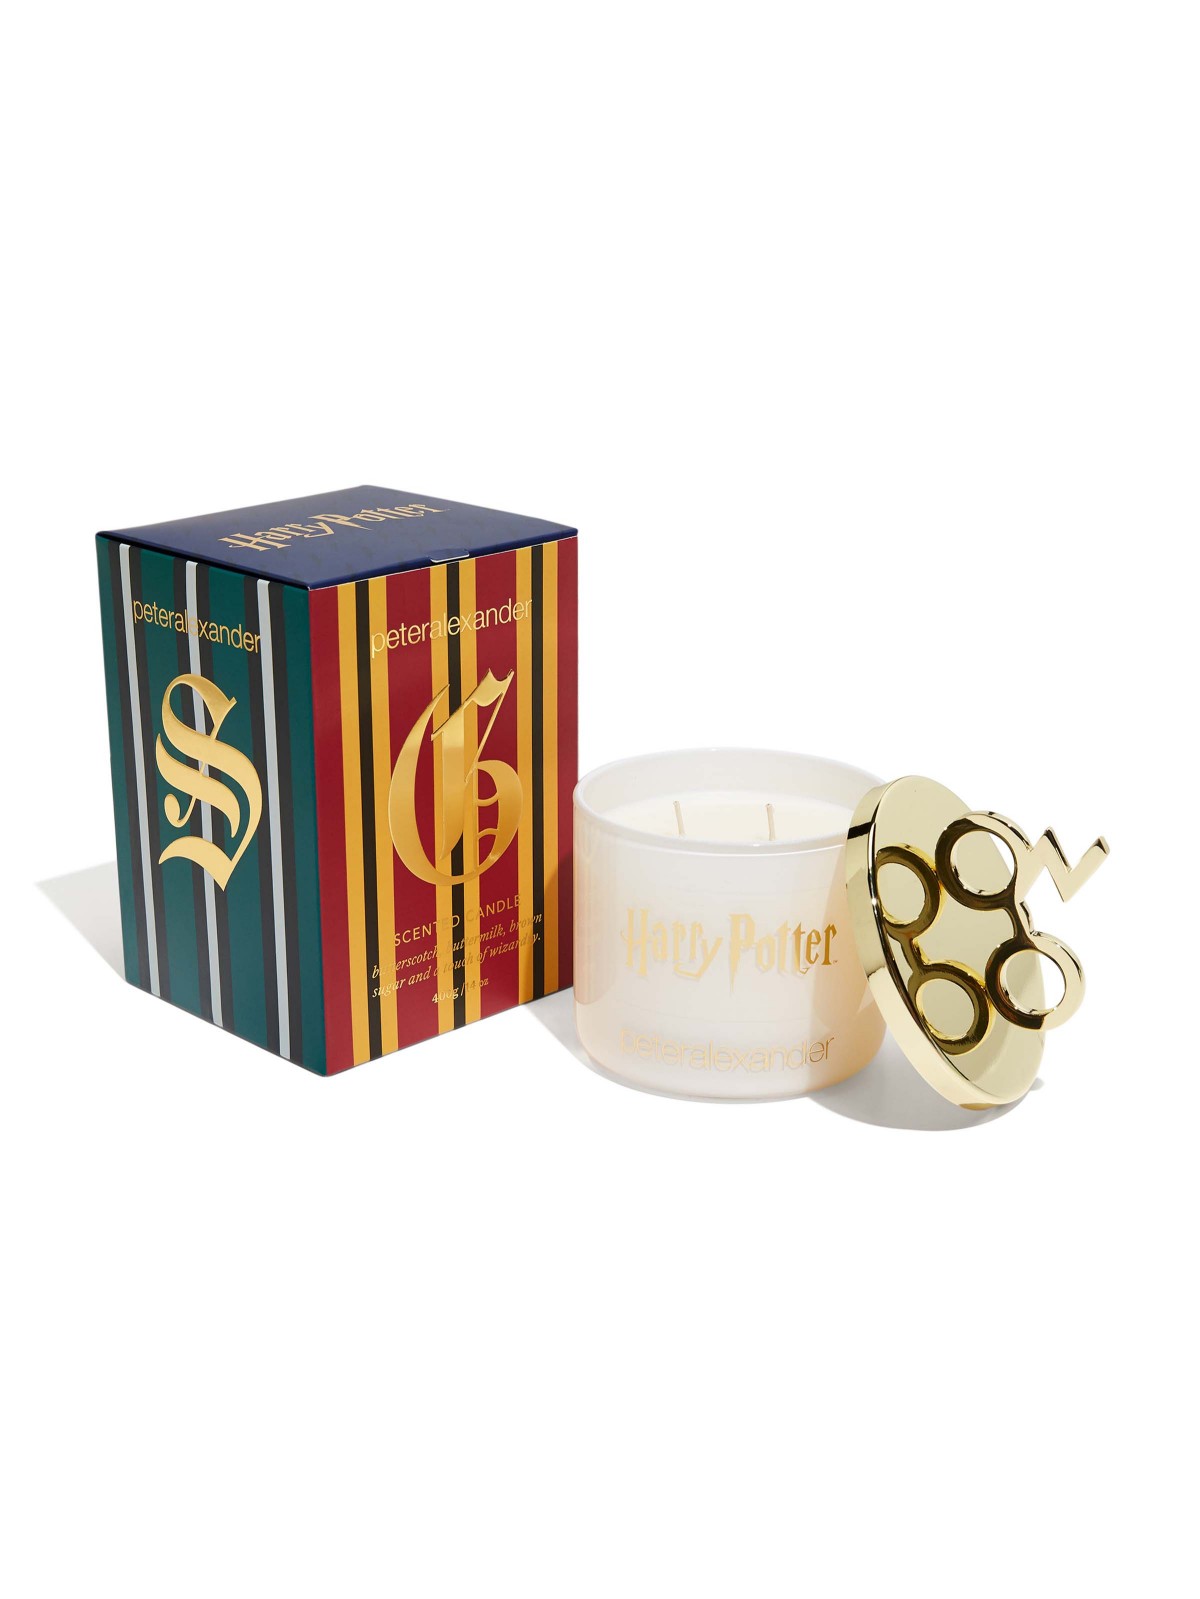 Peter Alexander candle and package